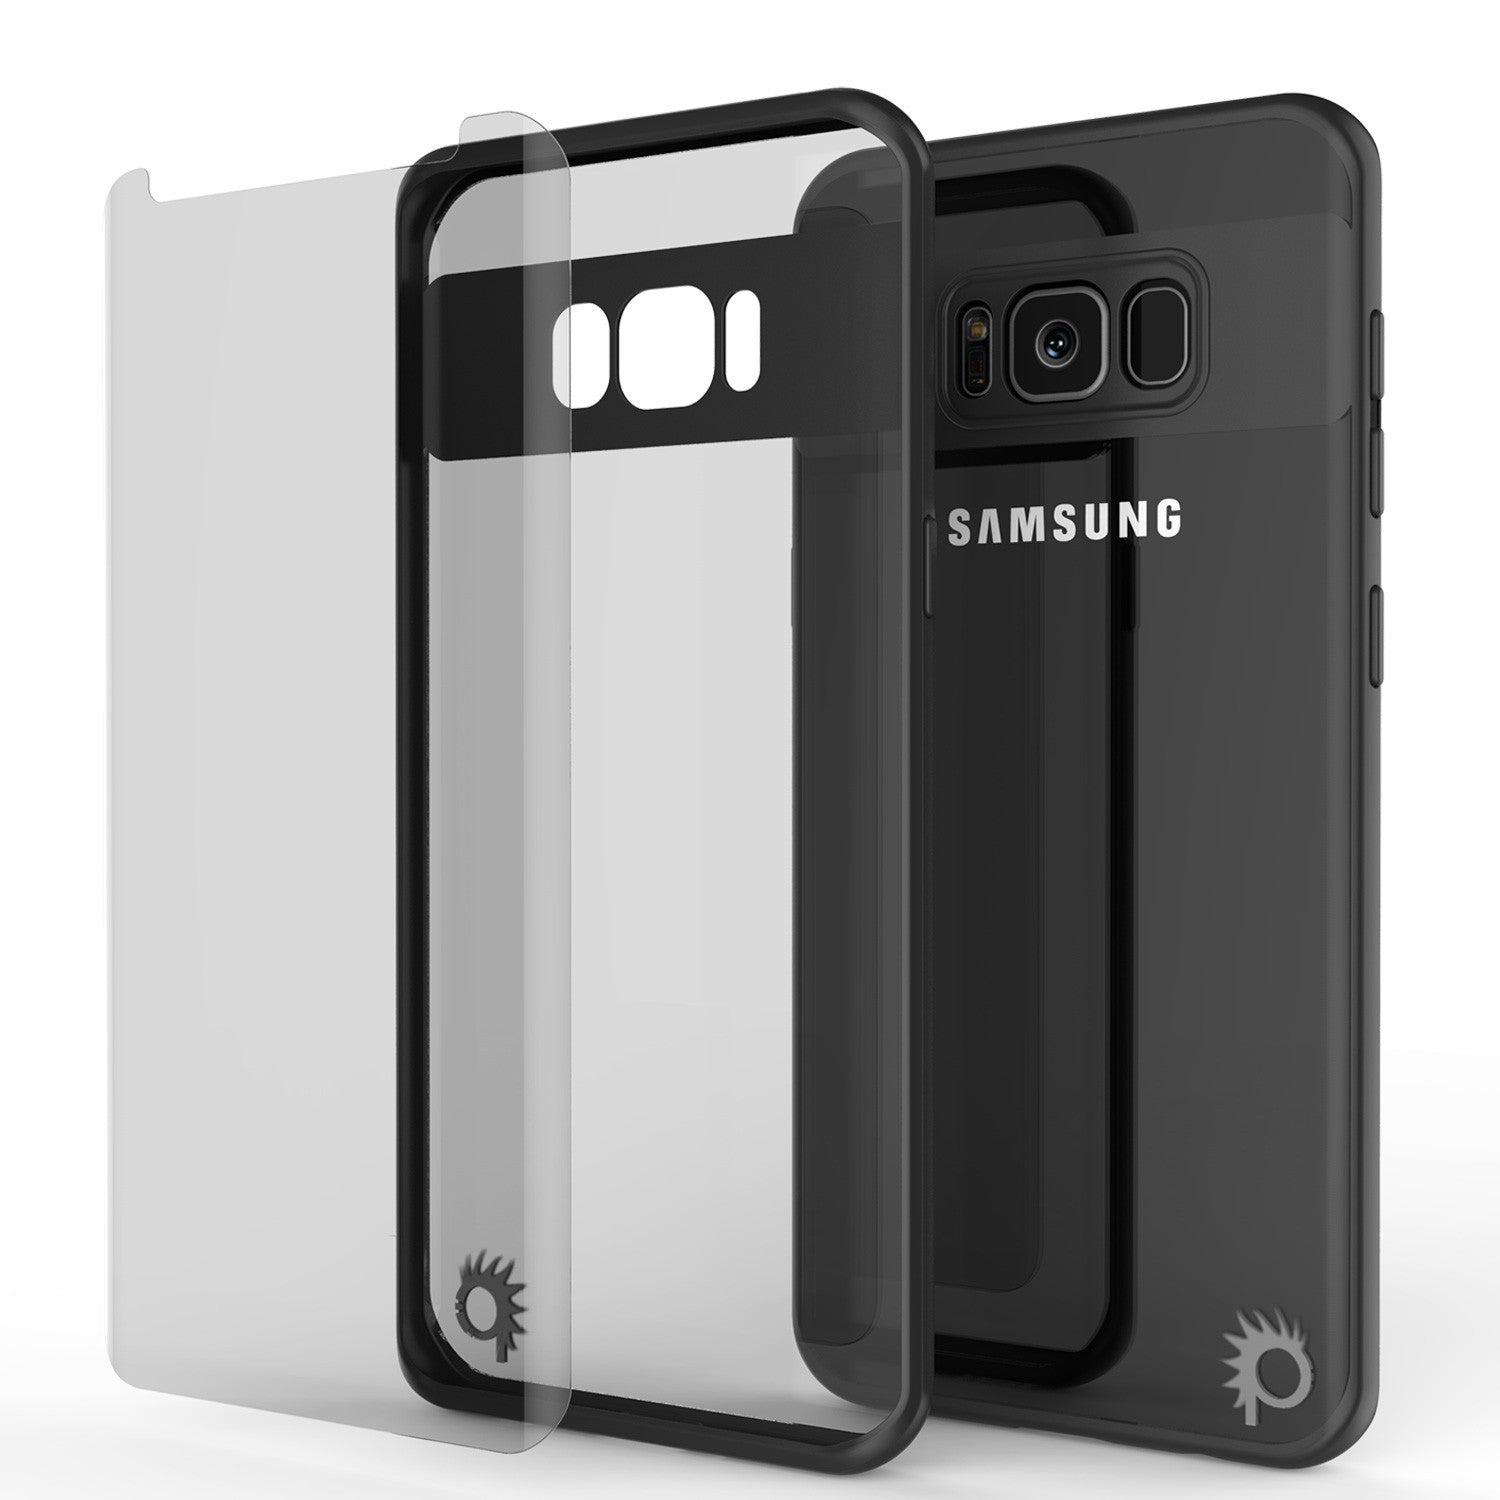 Galaxy S8 Plus Case, Punkcase [MASK Series] [BLACK] Full Body Hybrid Dual Layer TPU Cover W/ Protective PUNKSHIELD Screen Protector